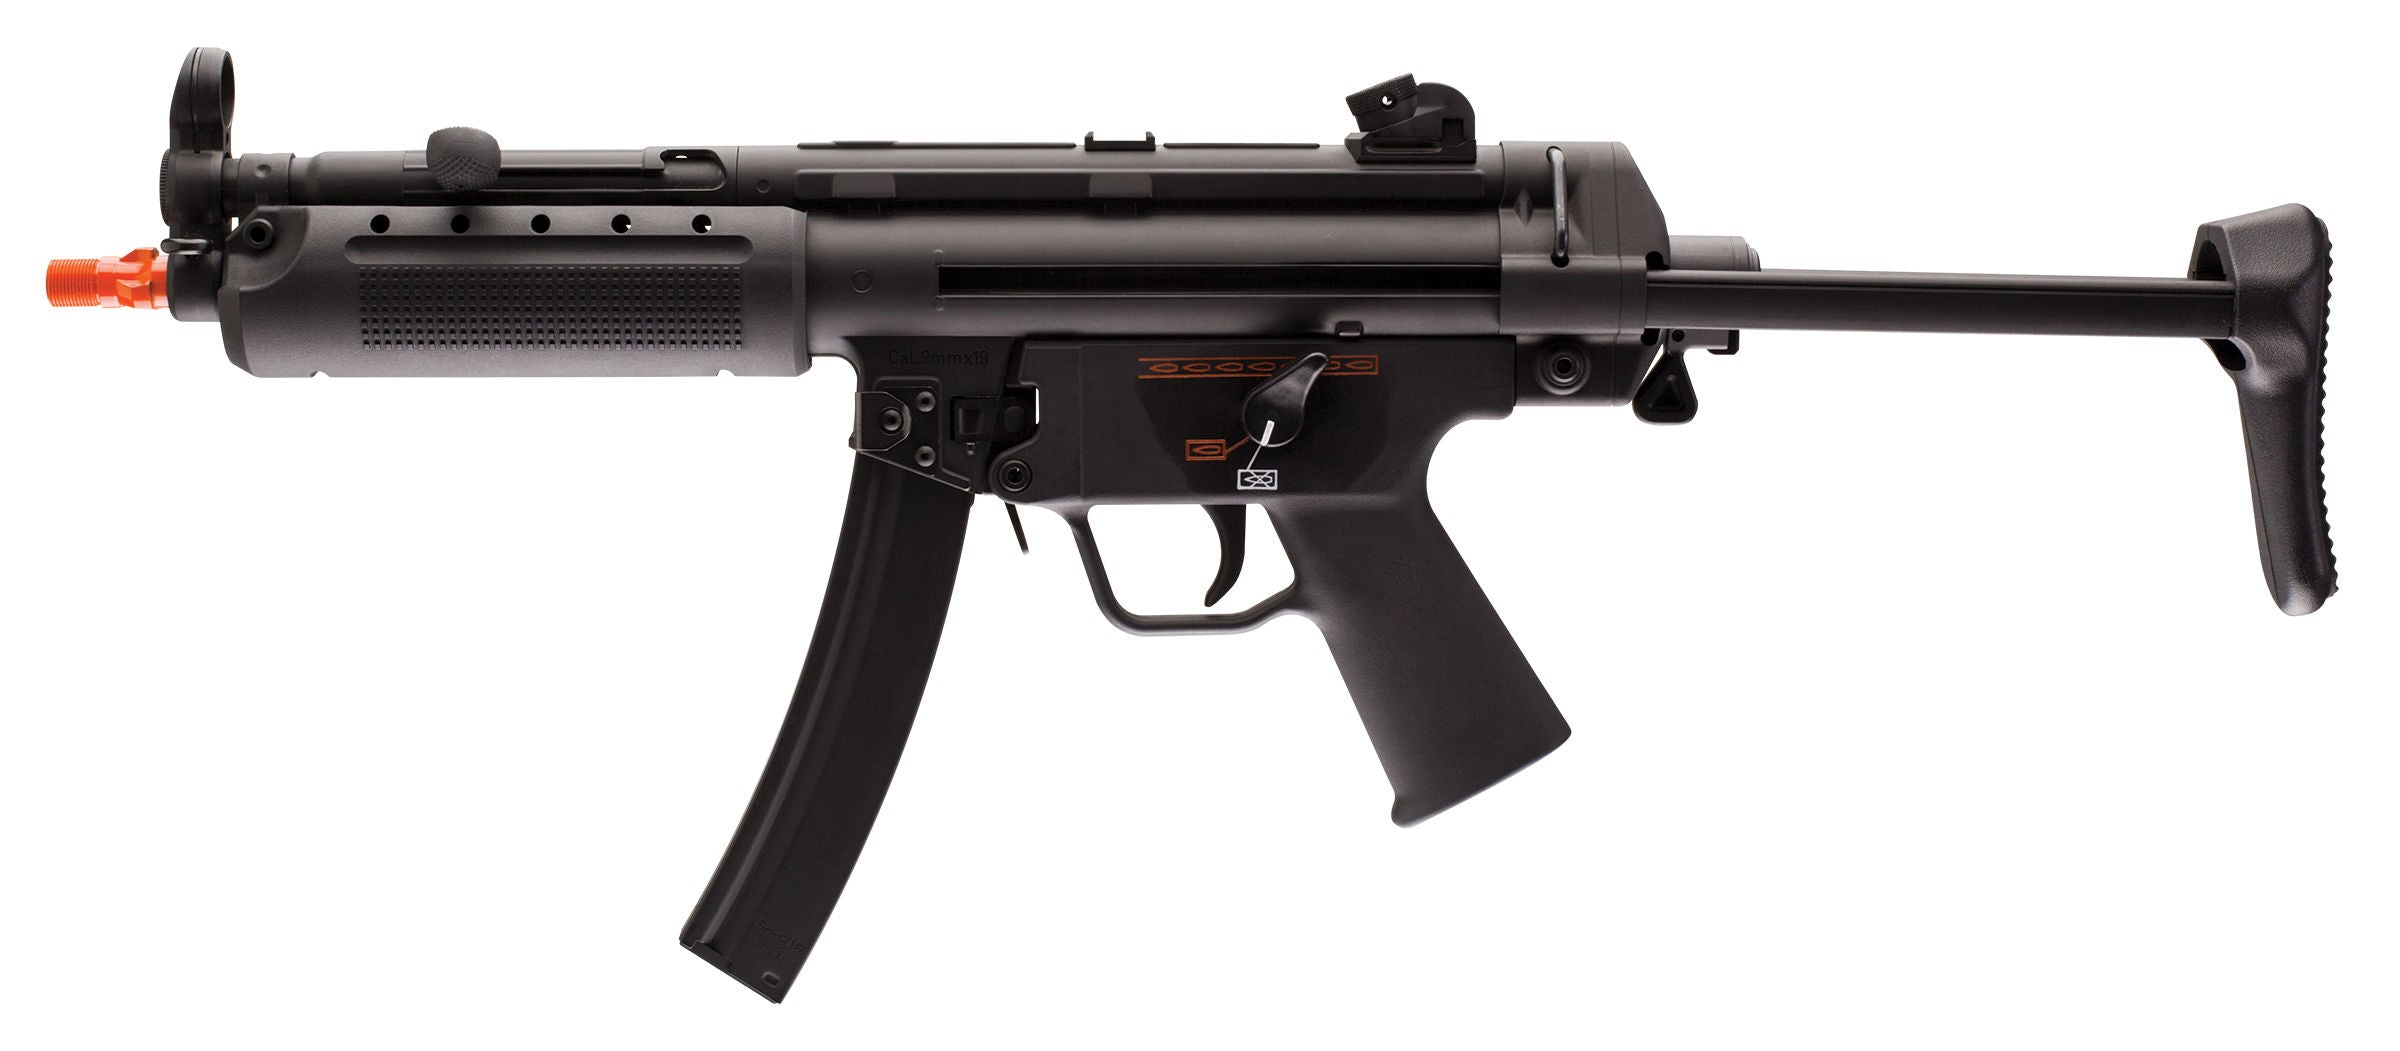 Elite Force Airsoft H&K MP5A5 Full Metal Airsoft AEG Rifle by Umarex / VFC - ssairsoft.com